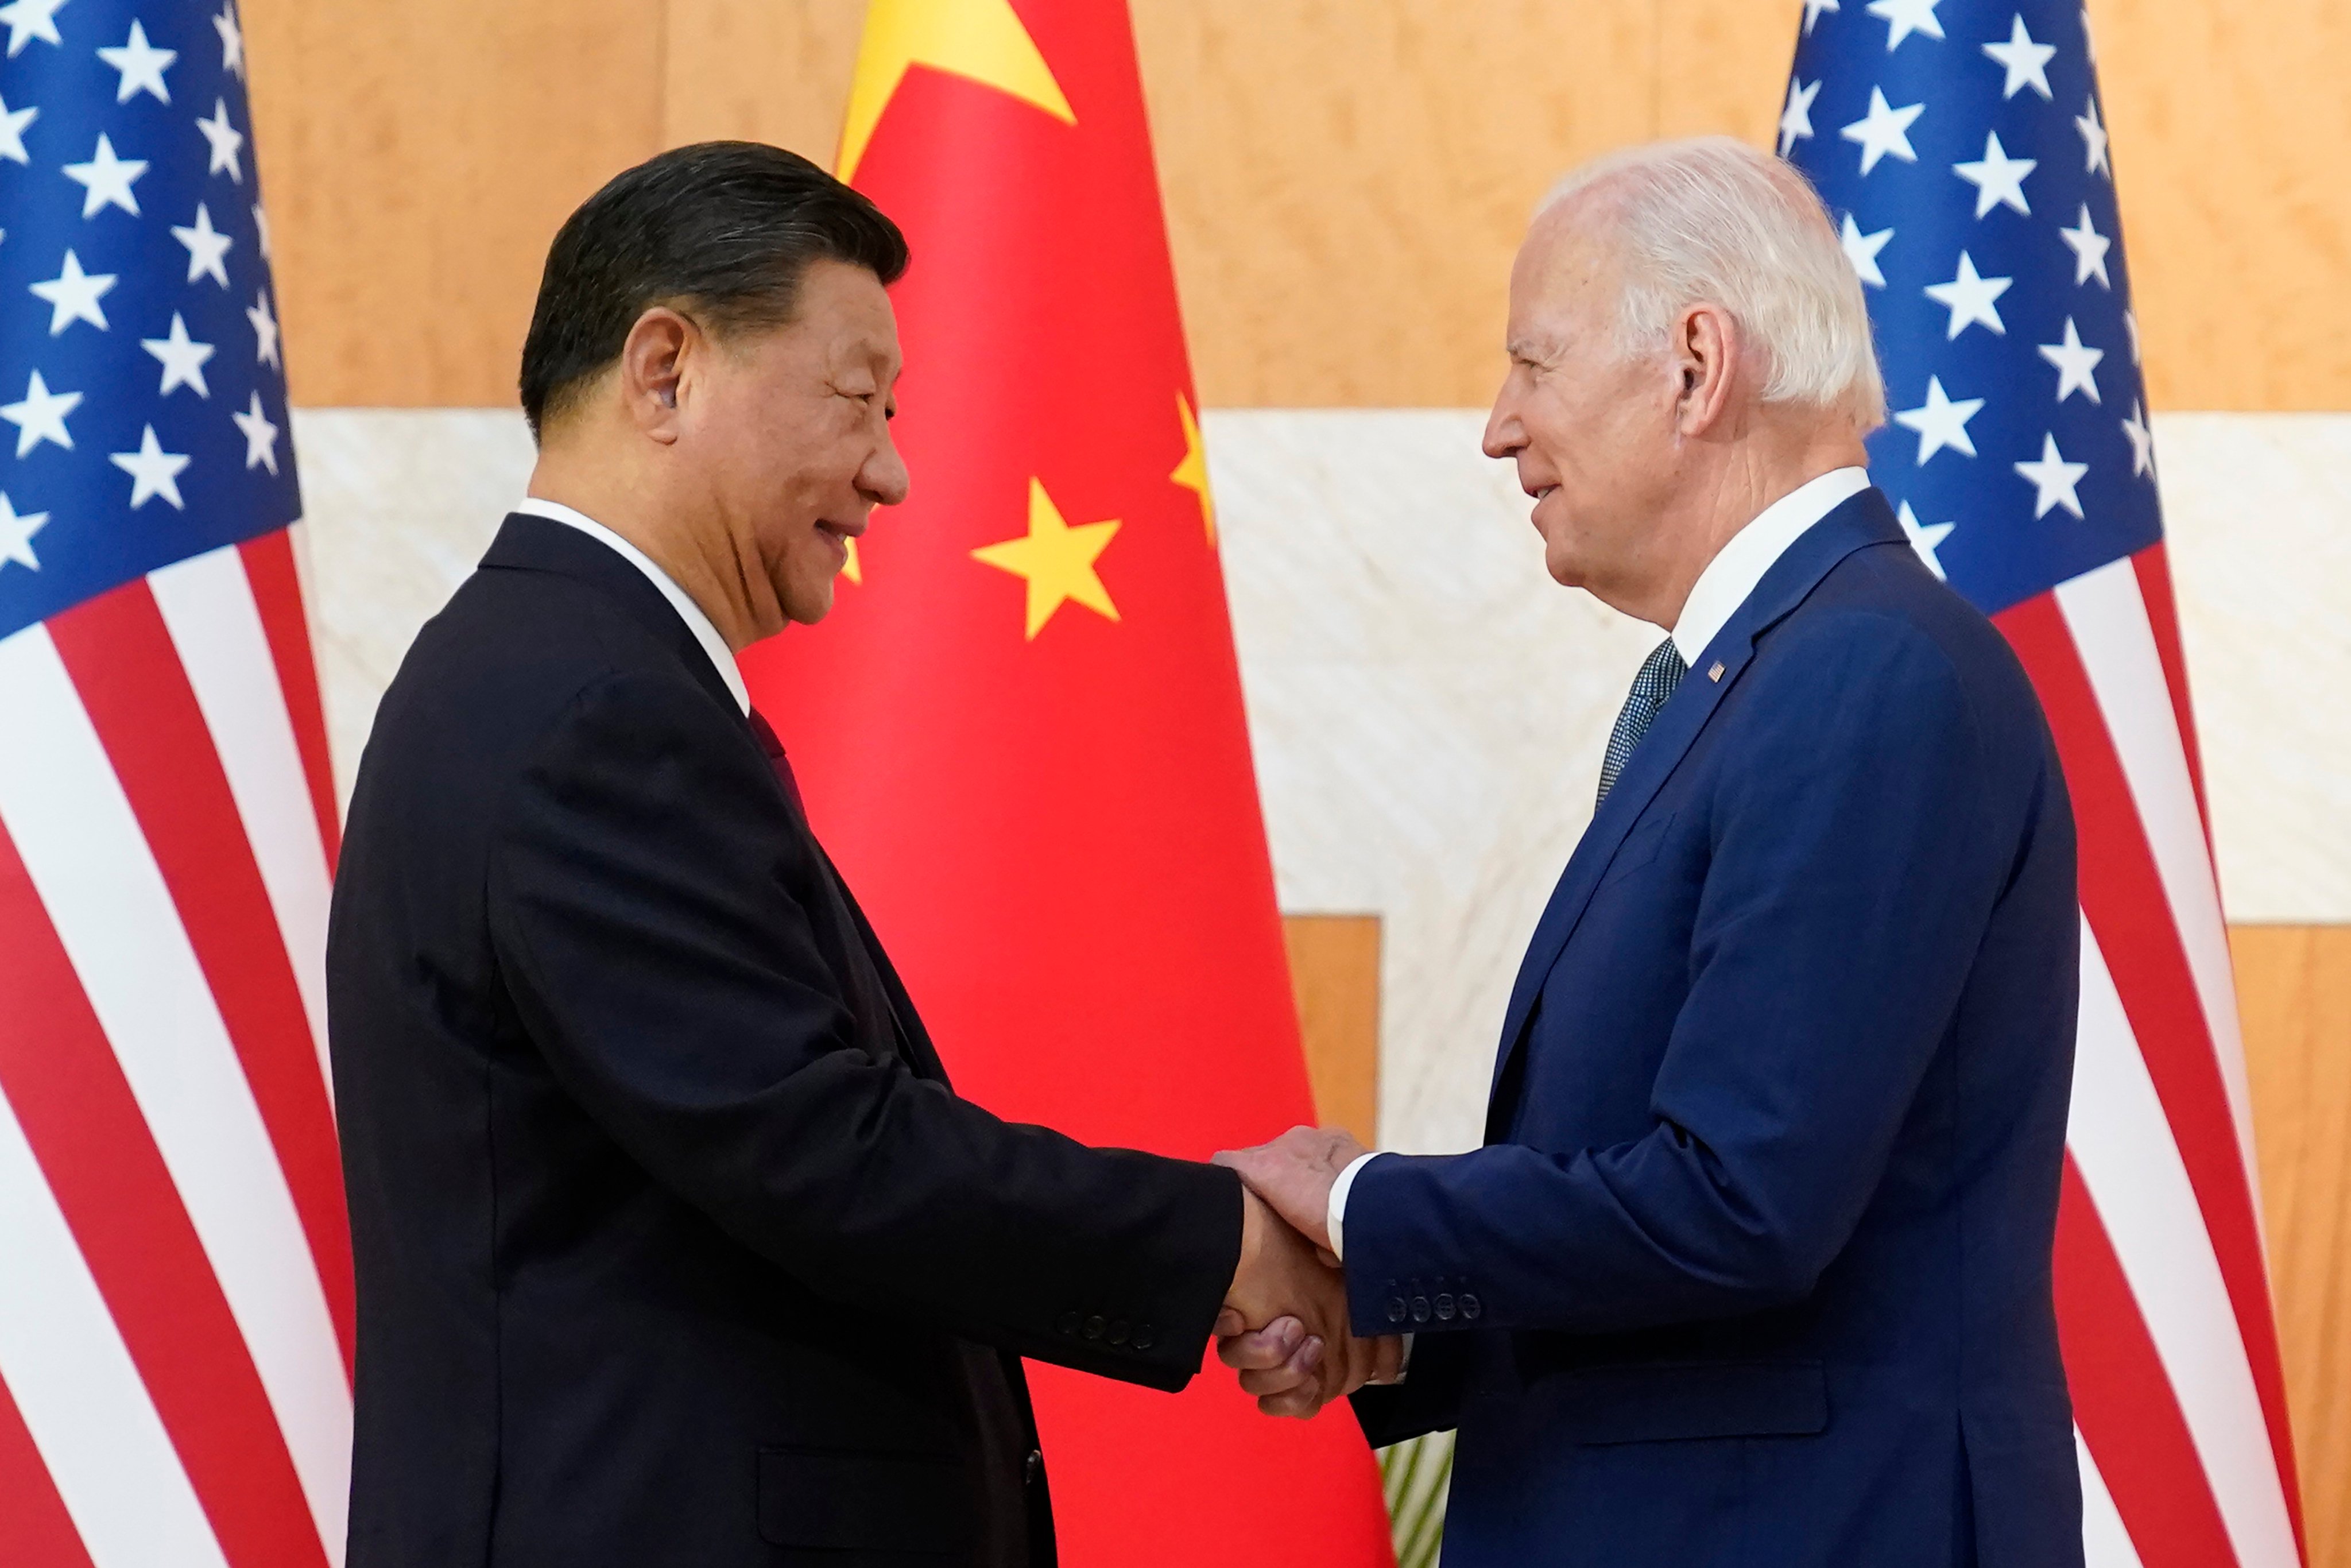 Chinese President Xi Jinping and US President Joe Biden shake hands before their meeting on the sidelines of the G20 summit on November 14 in Bali, Indonesia. Photo: AP